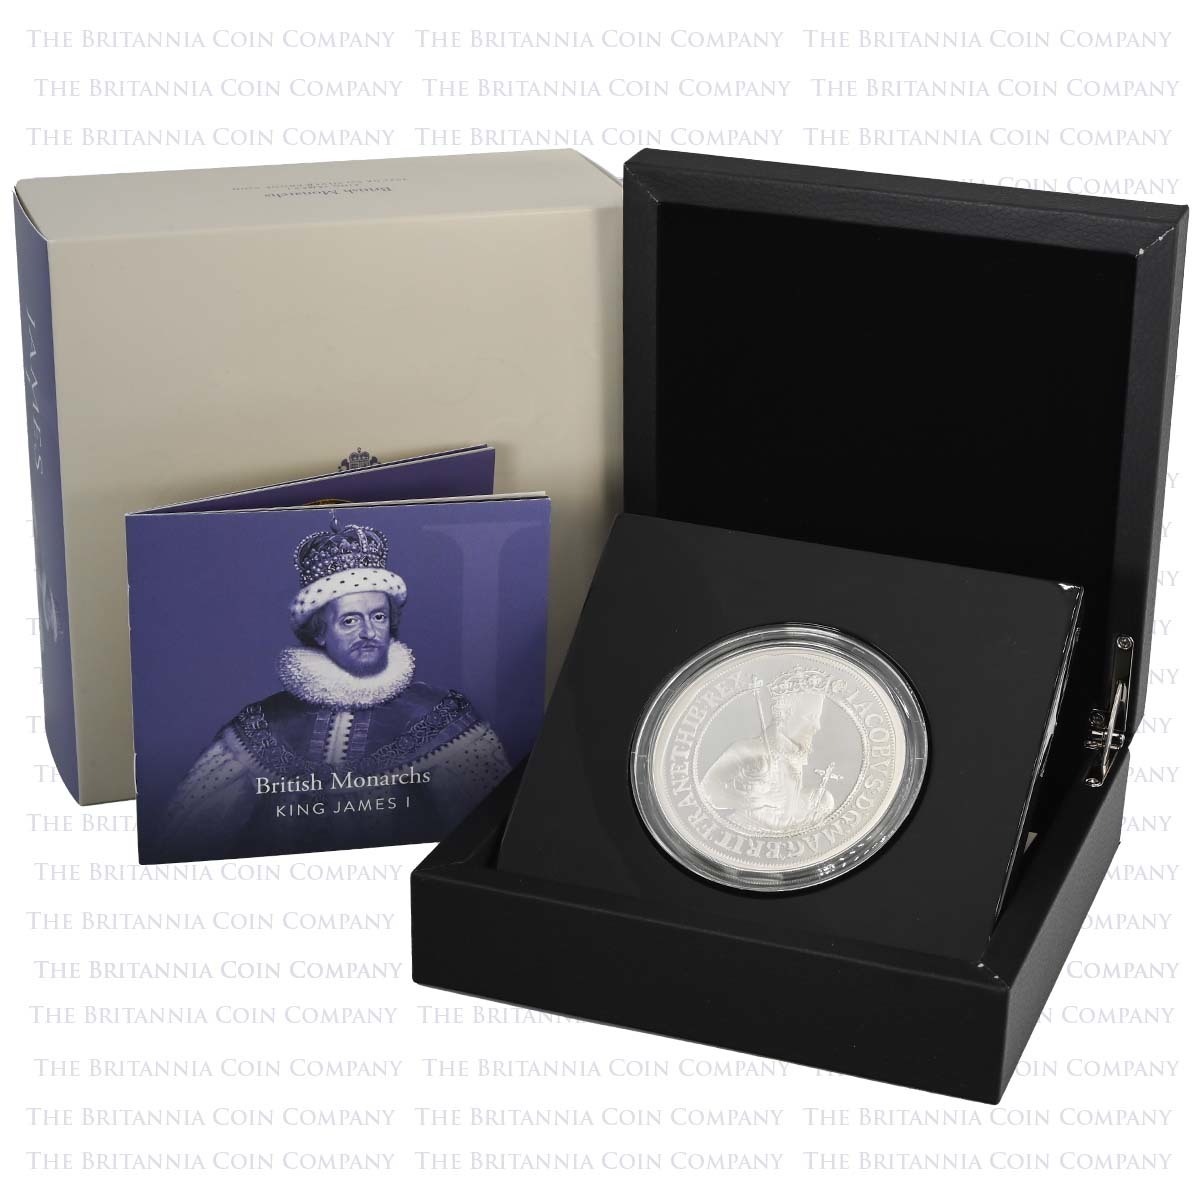 UK22J1S5O 2022 British Monarchs James I 5 Ounce Silver Proof Boxed